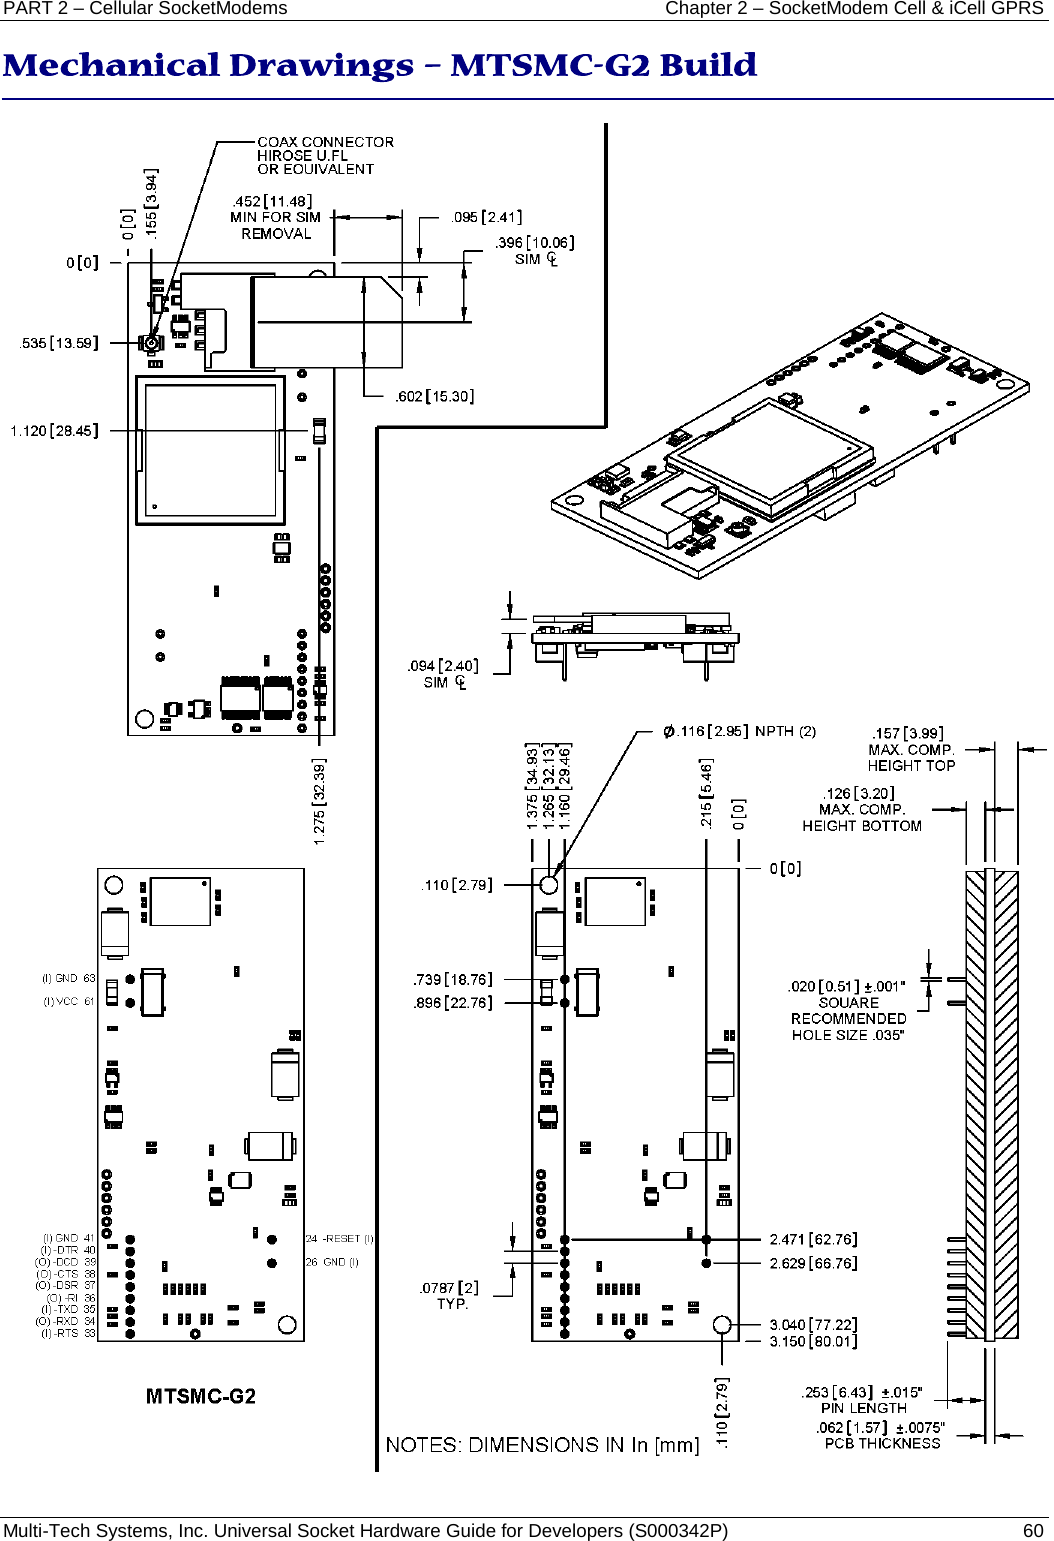 PART 2 – Cellular SocketModems  Chapter 2 – SocketModem Cell &amp; iCell GPRS Multi-Tech Systems, Inc. Universal Socket Hardware Guide for Developers (S000342P)  60  Mechanical Drawings – MTSMC-G2 Build   